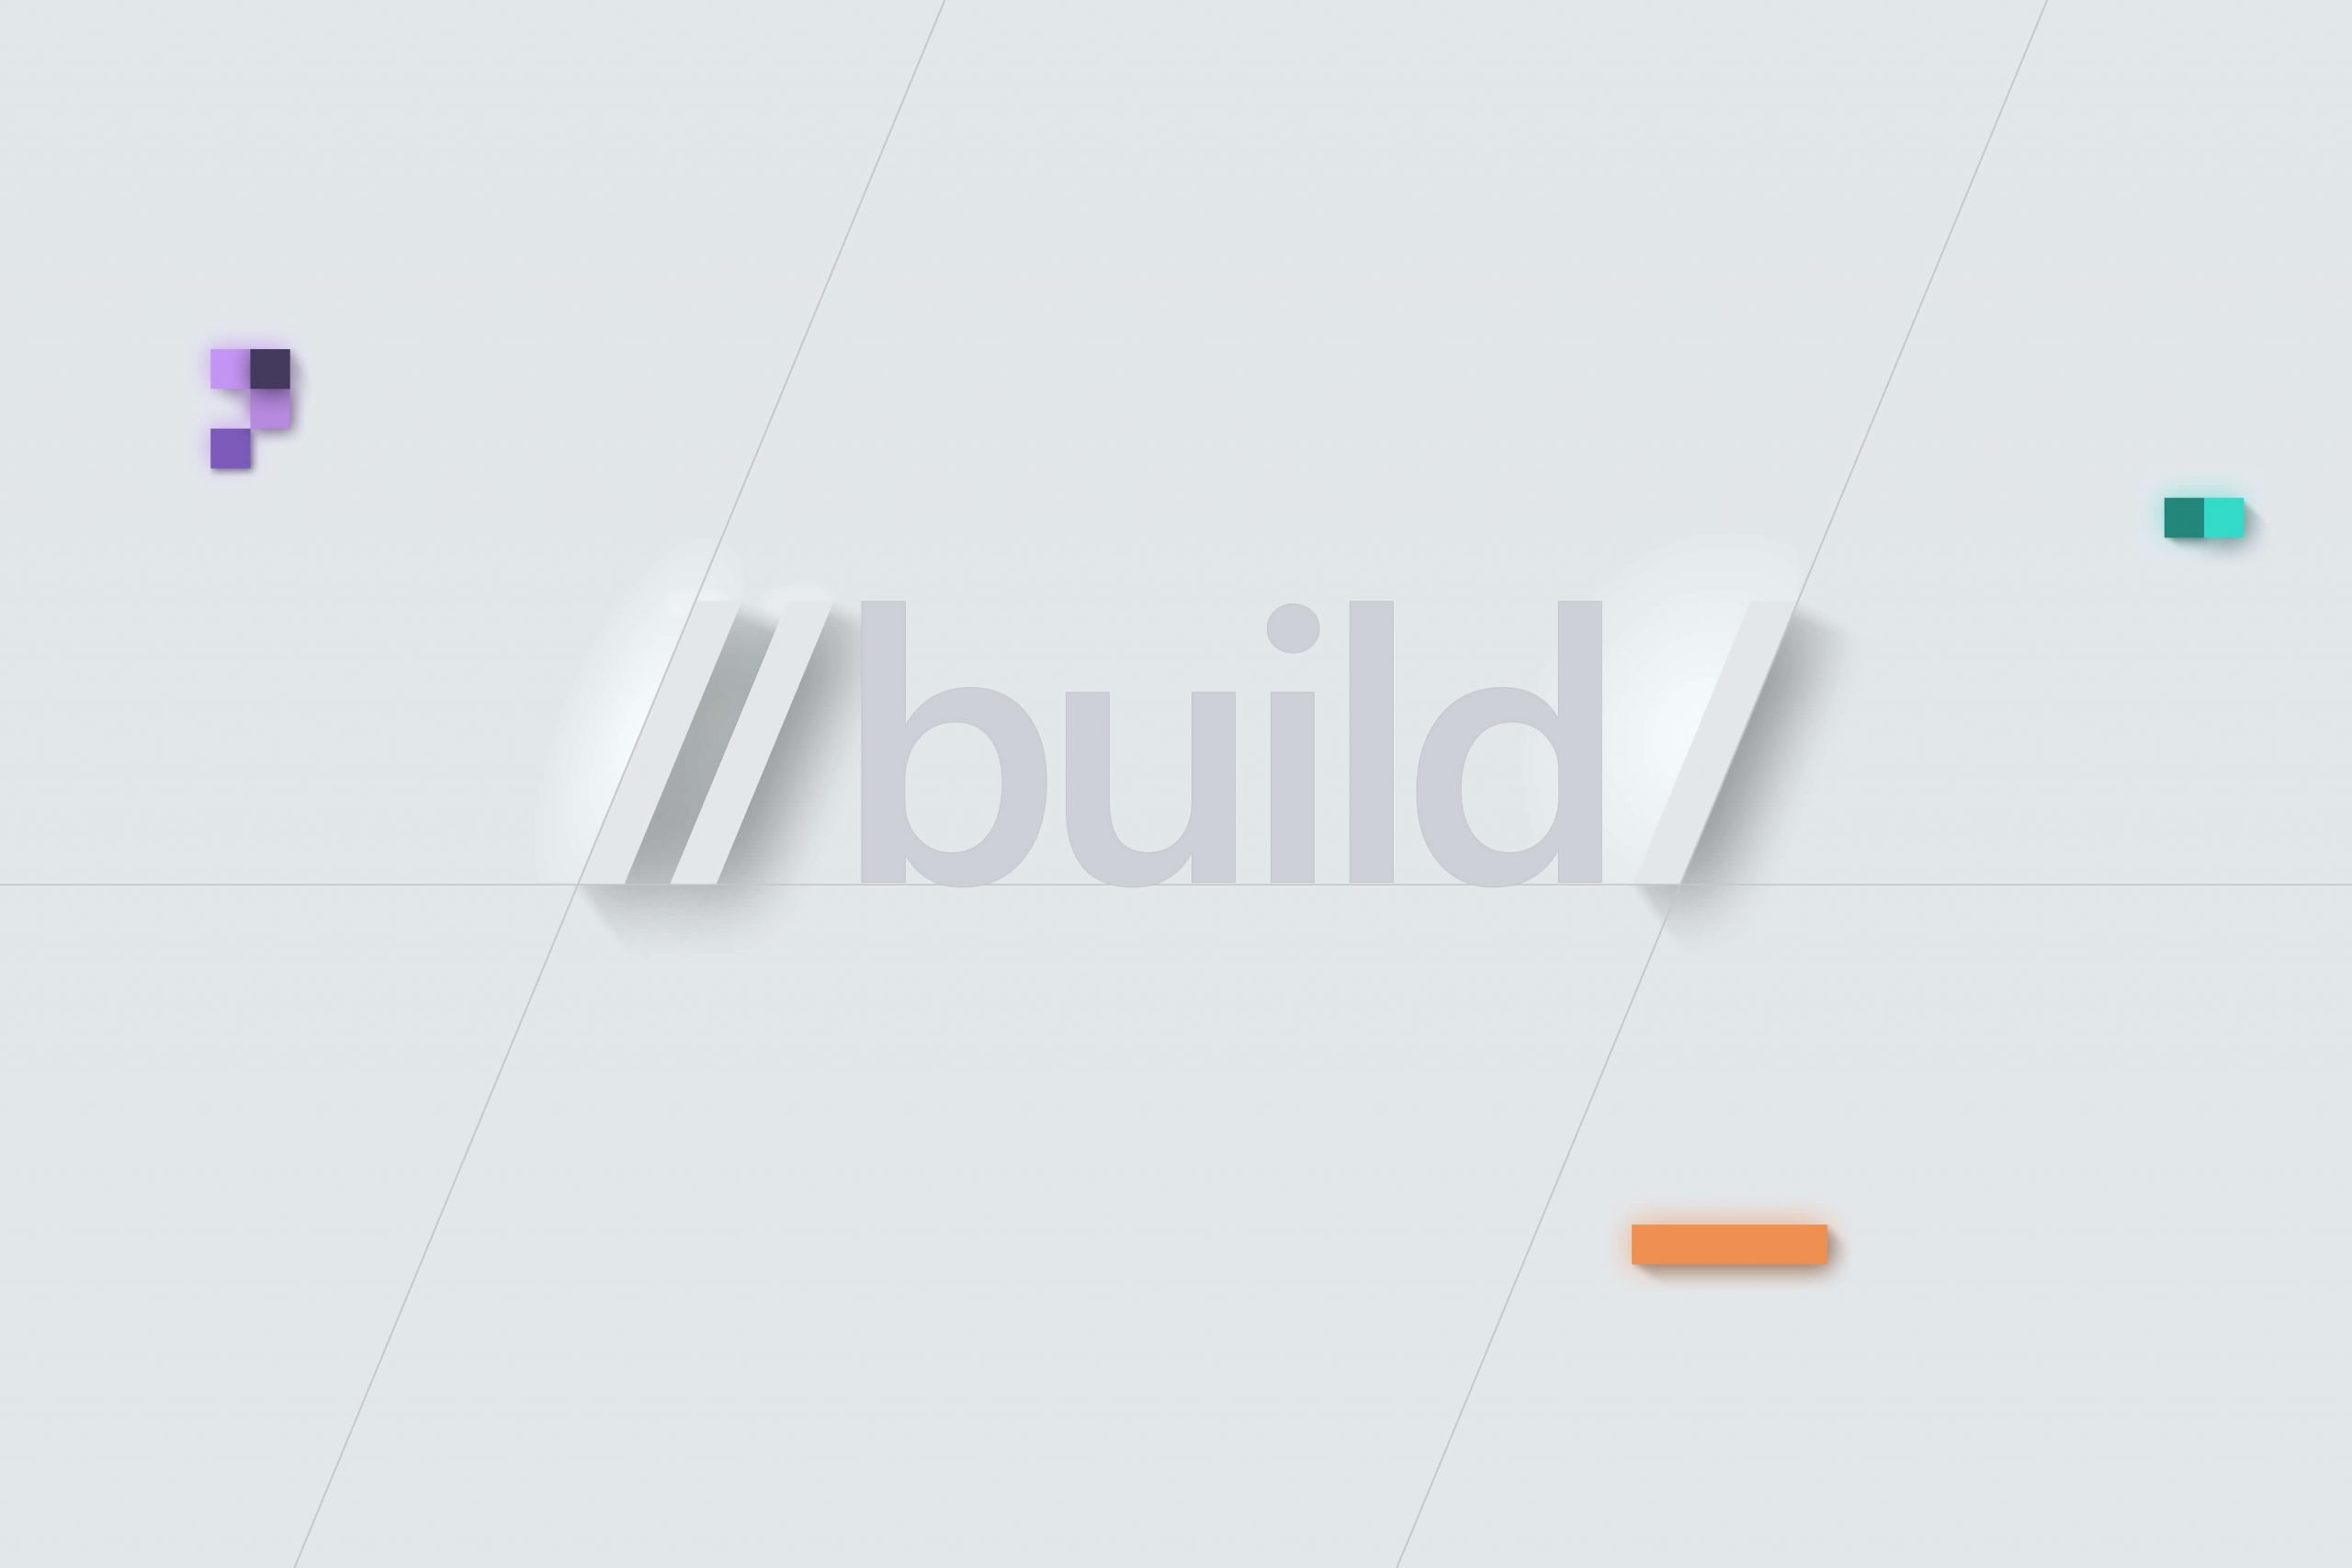 Microsoft’s Build 2020 conference will be on May 19-21, 2020 in Seattle, WA.